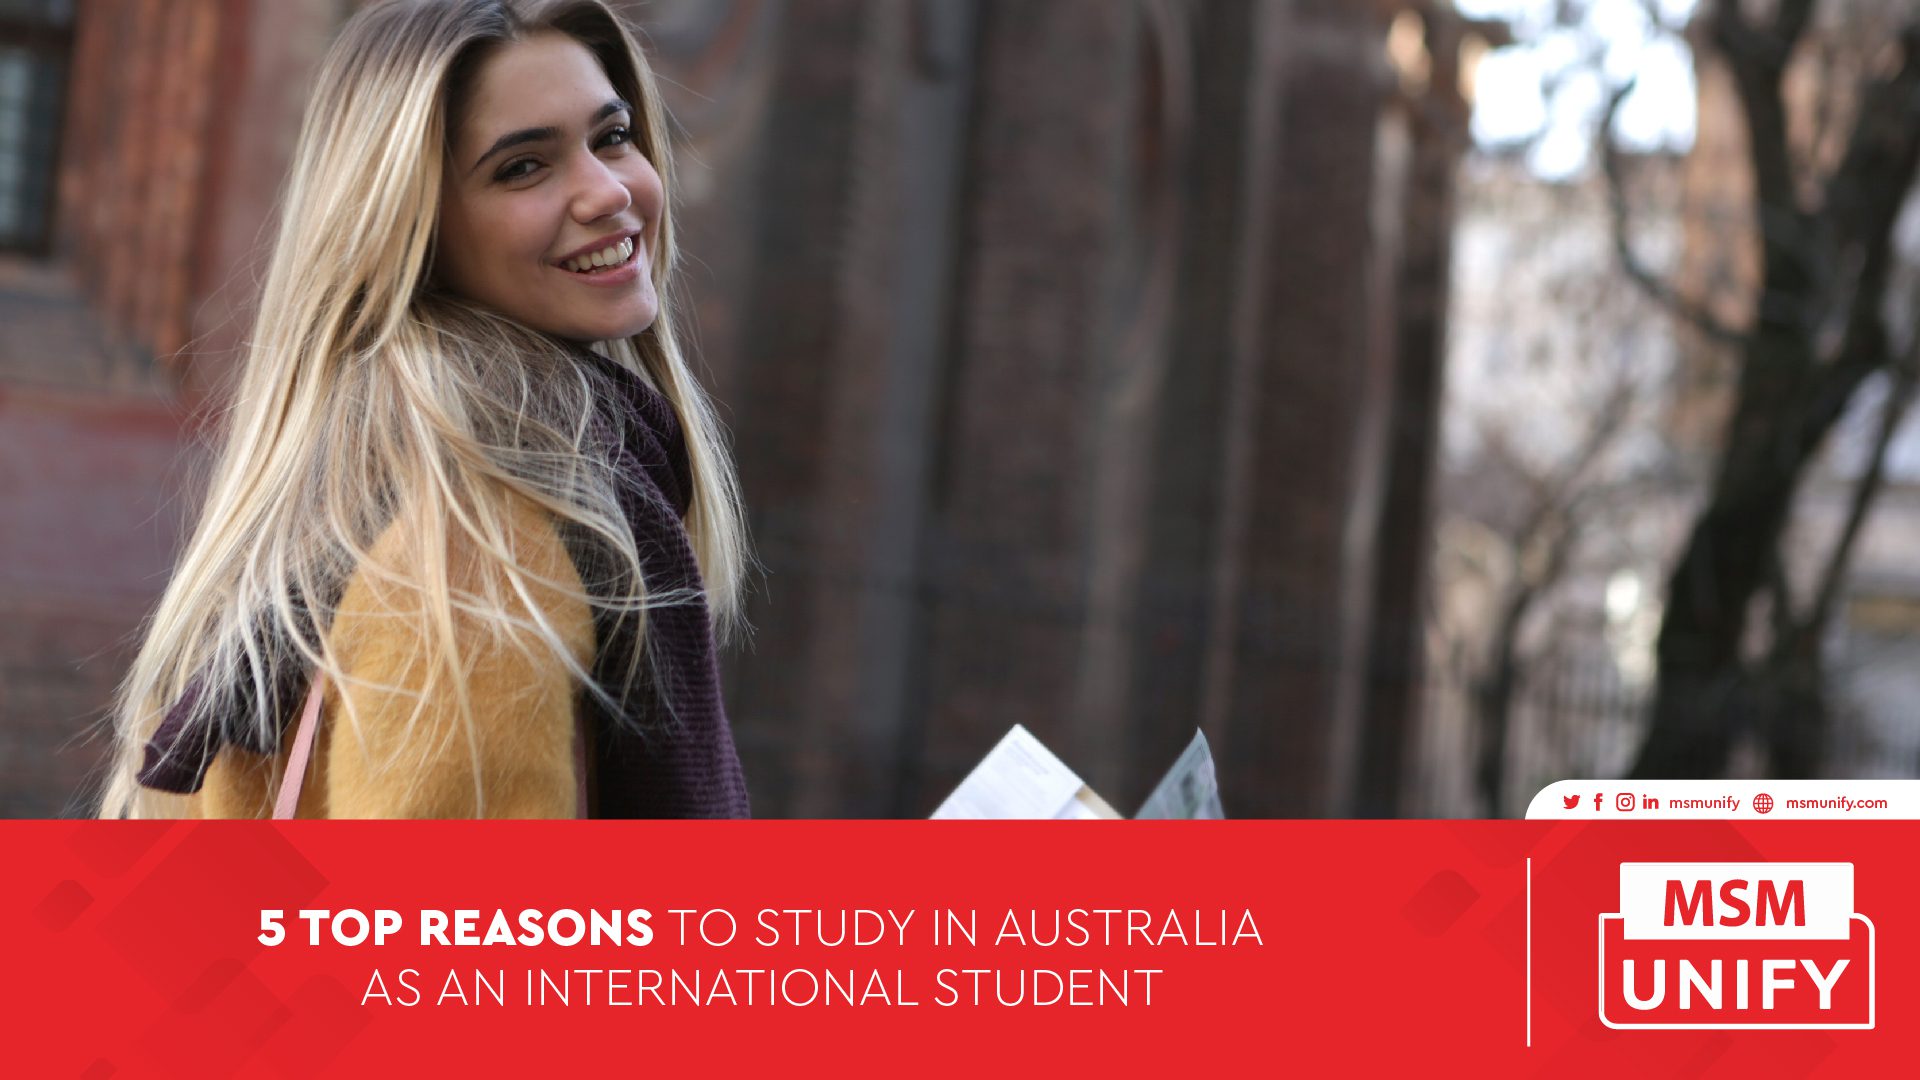 110822 MSM Unify 5 Top Reasons to Study in Australia as an International Student 01